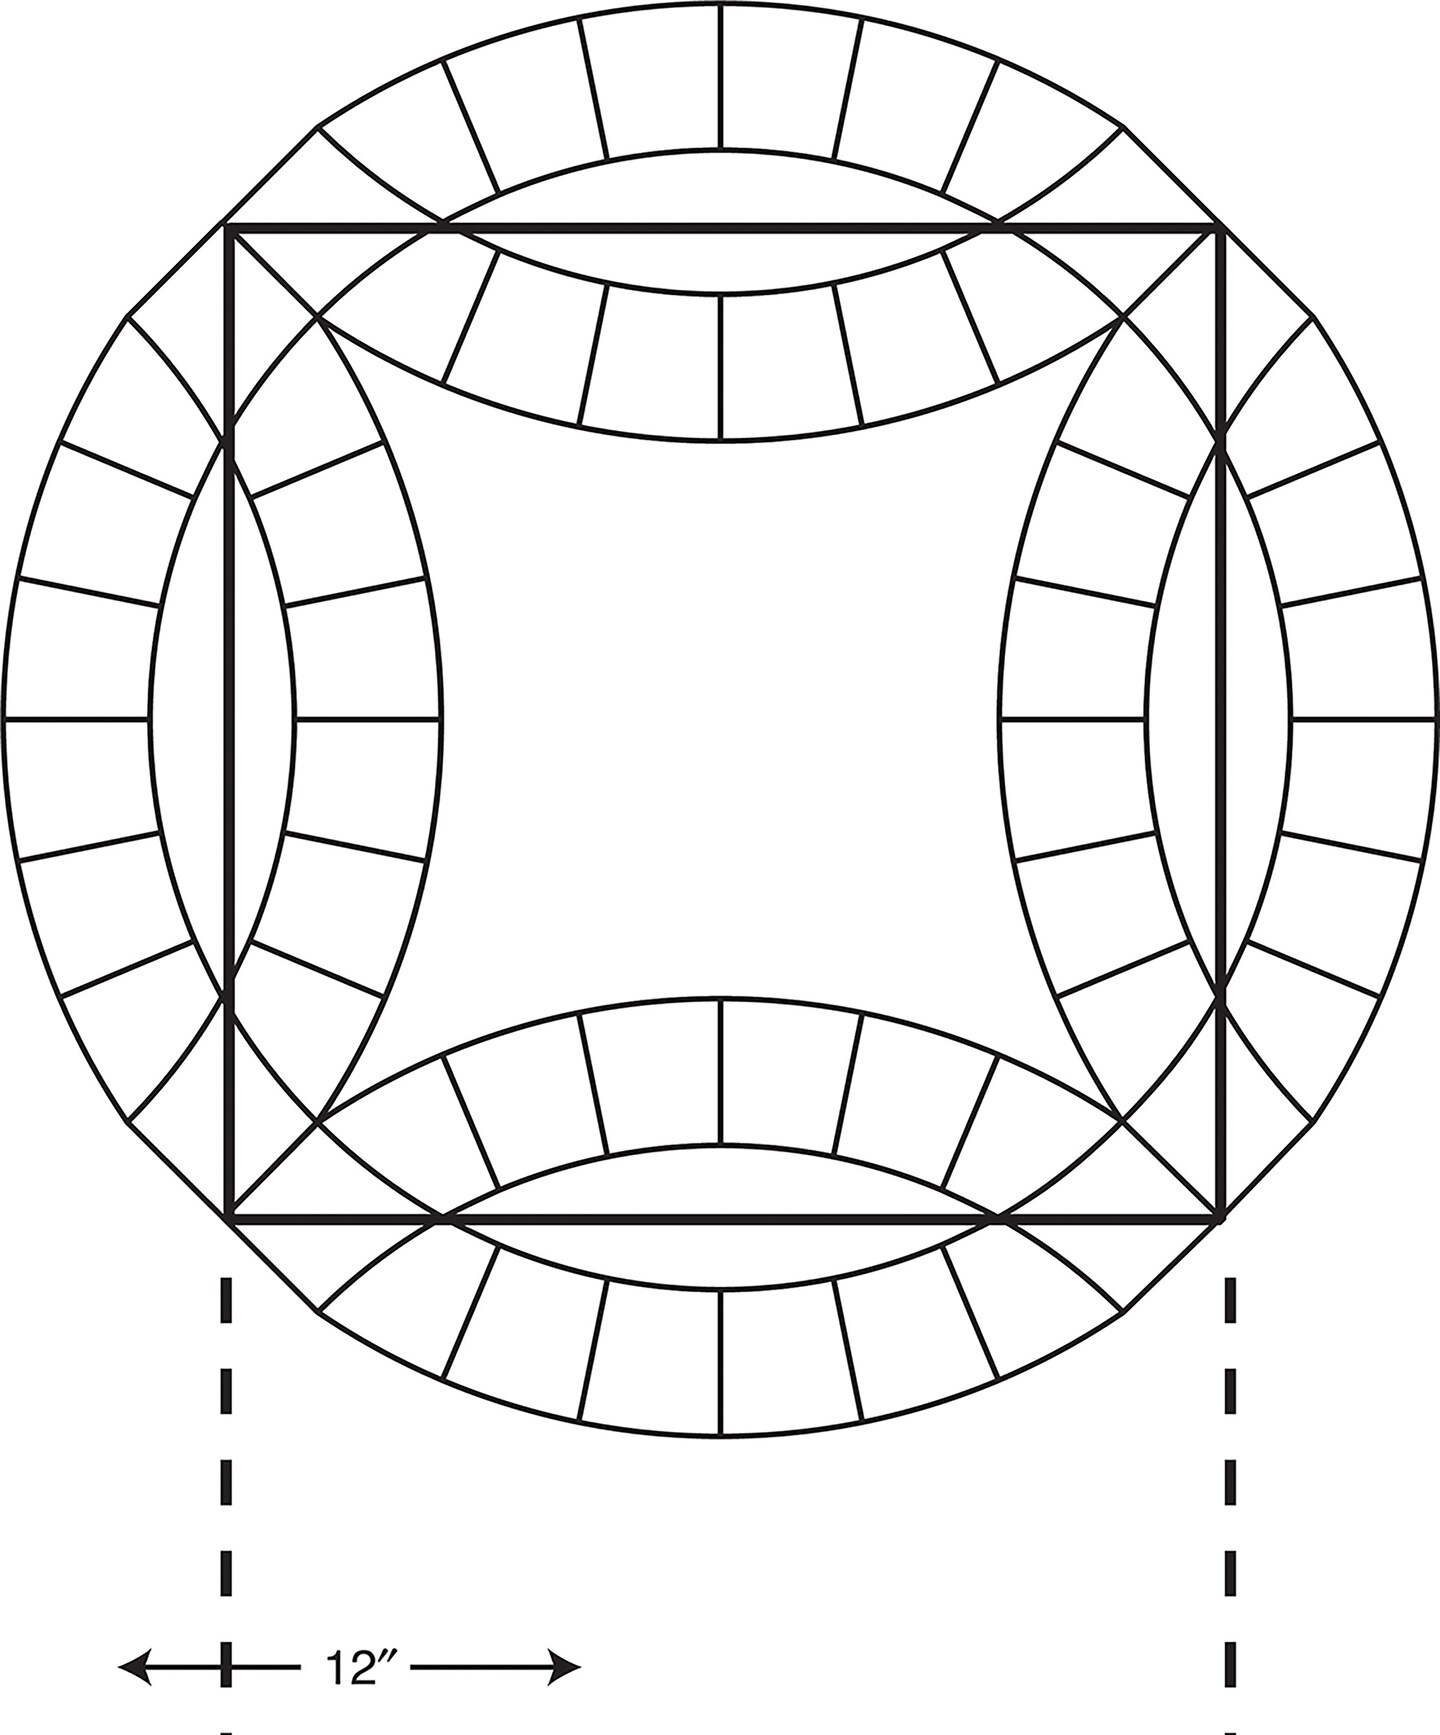 Double Wedding Ring Template